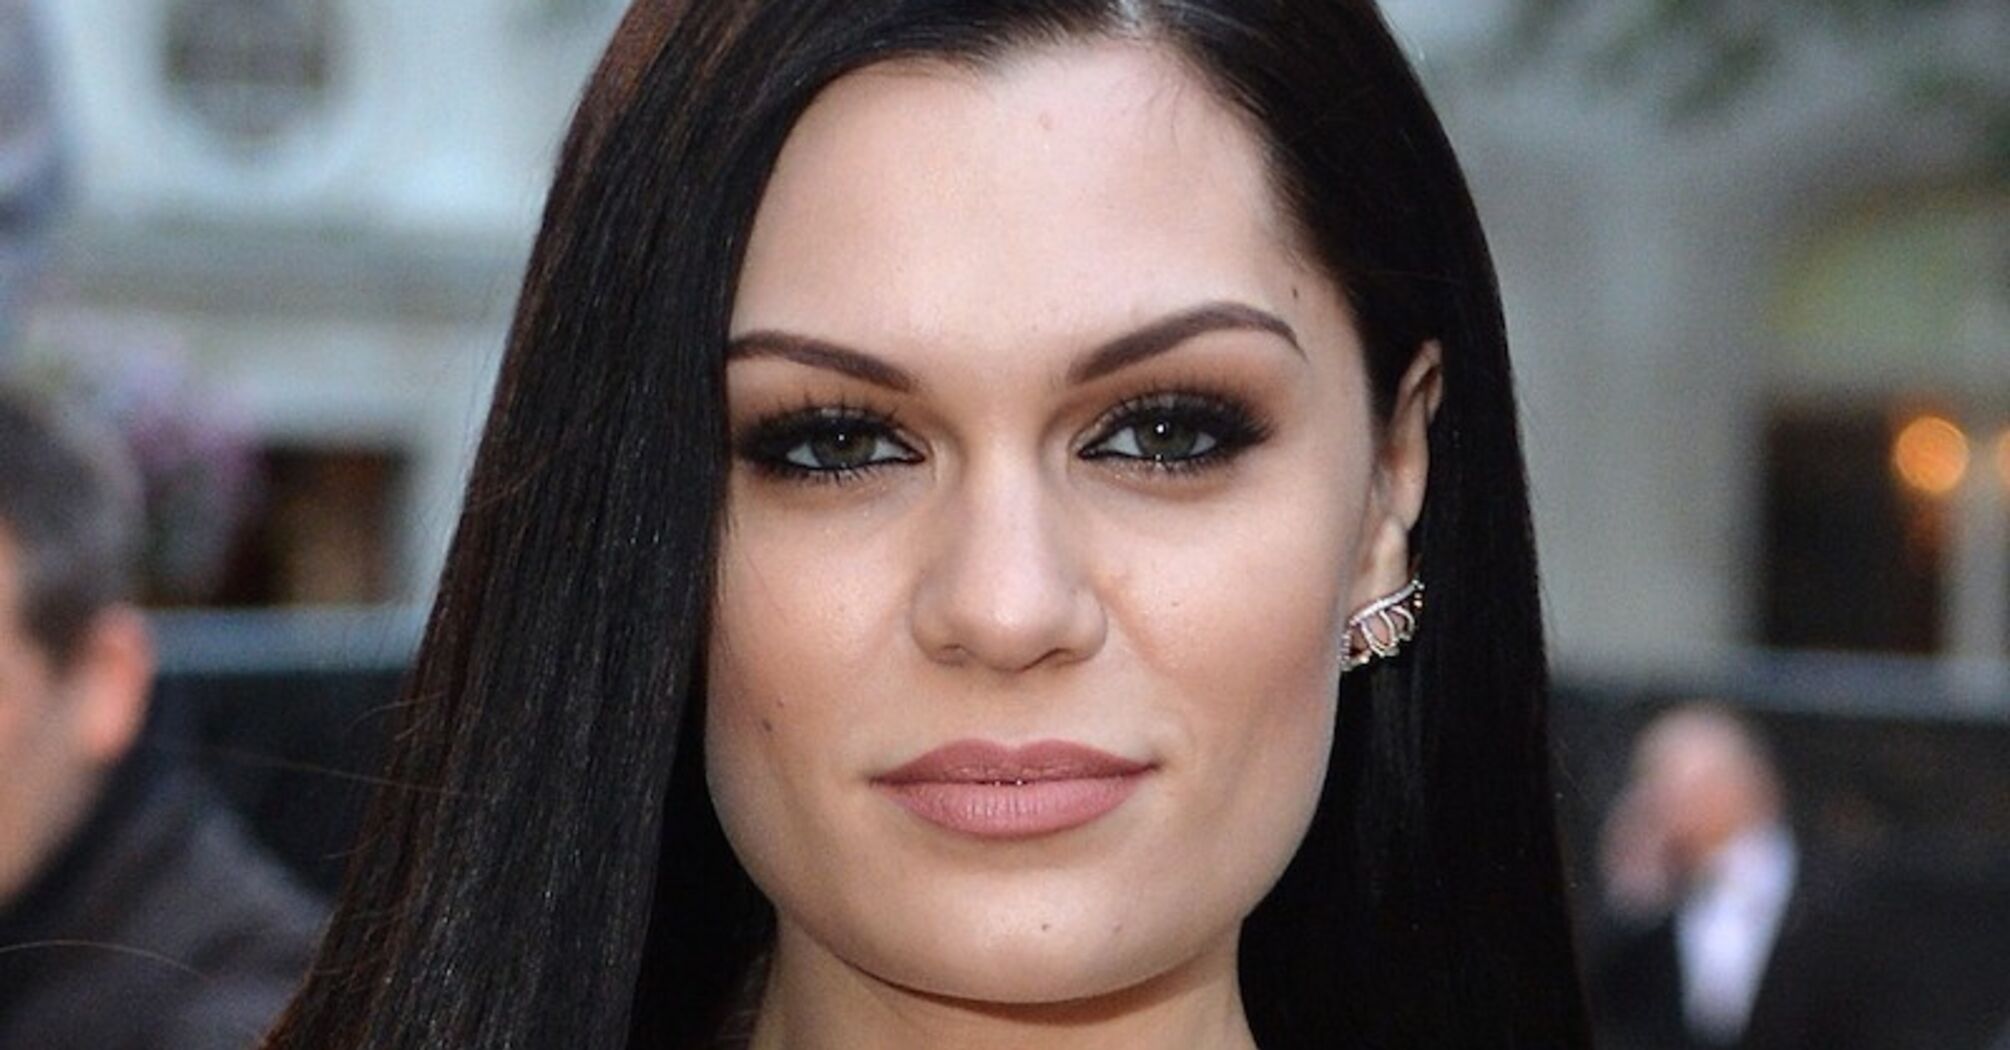 Jessie J Diagnosed with ADHD and OCD